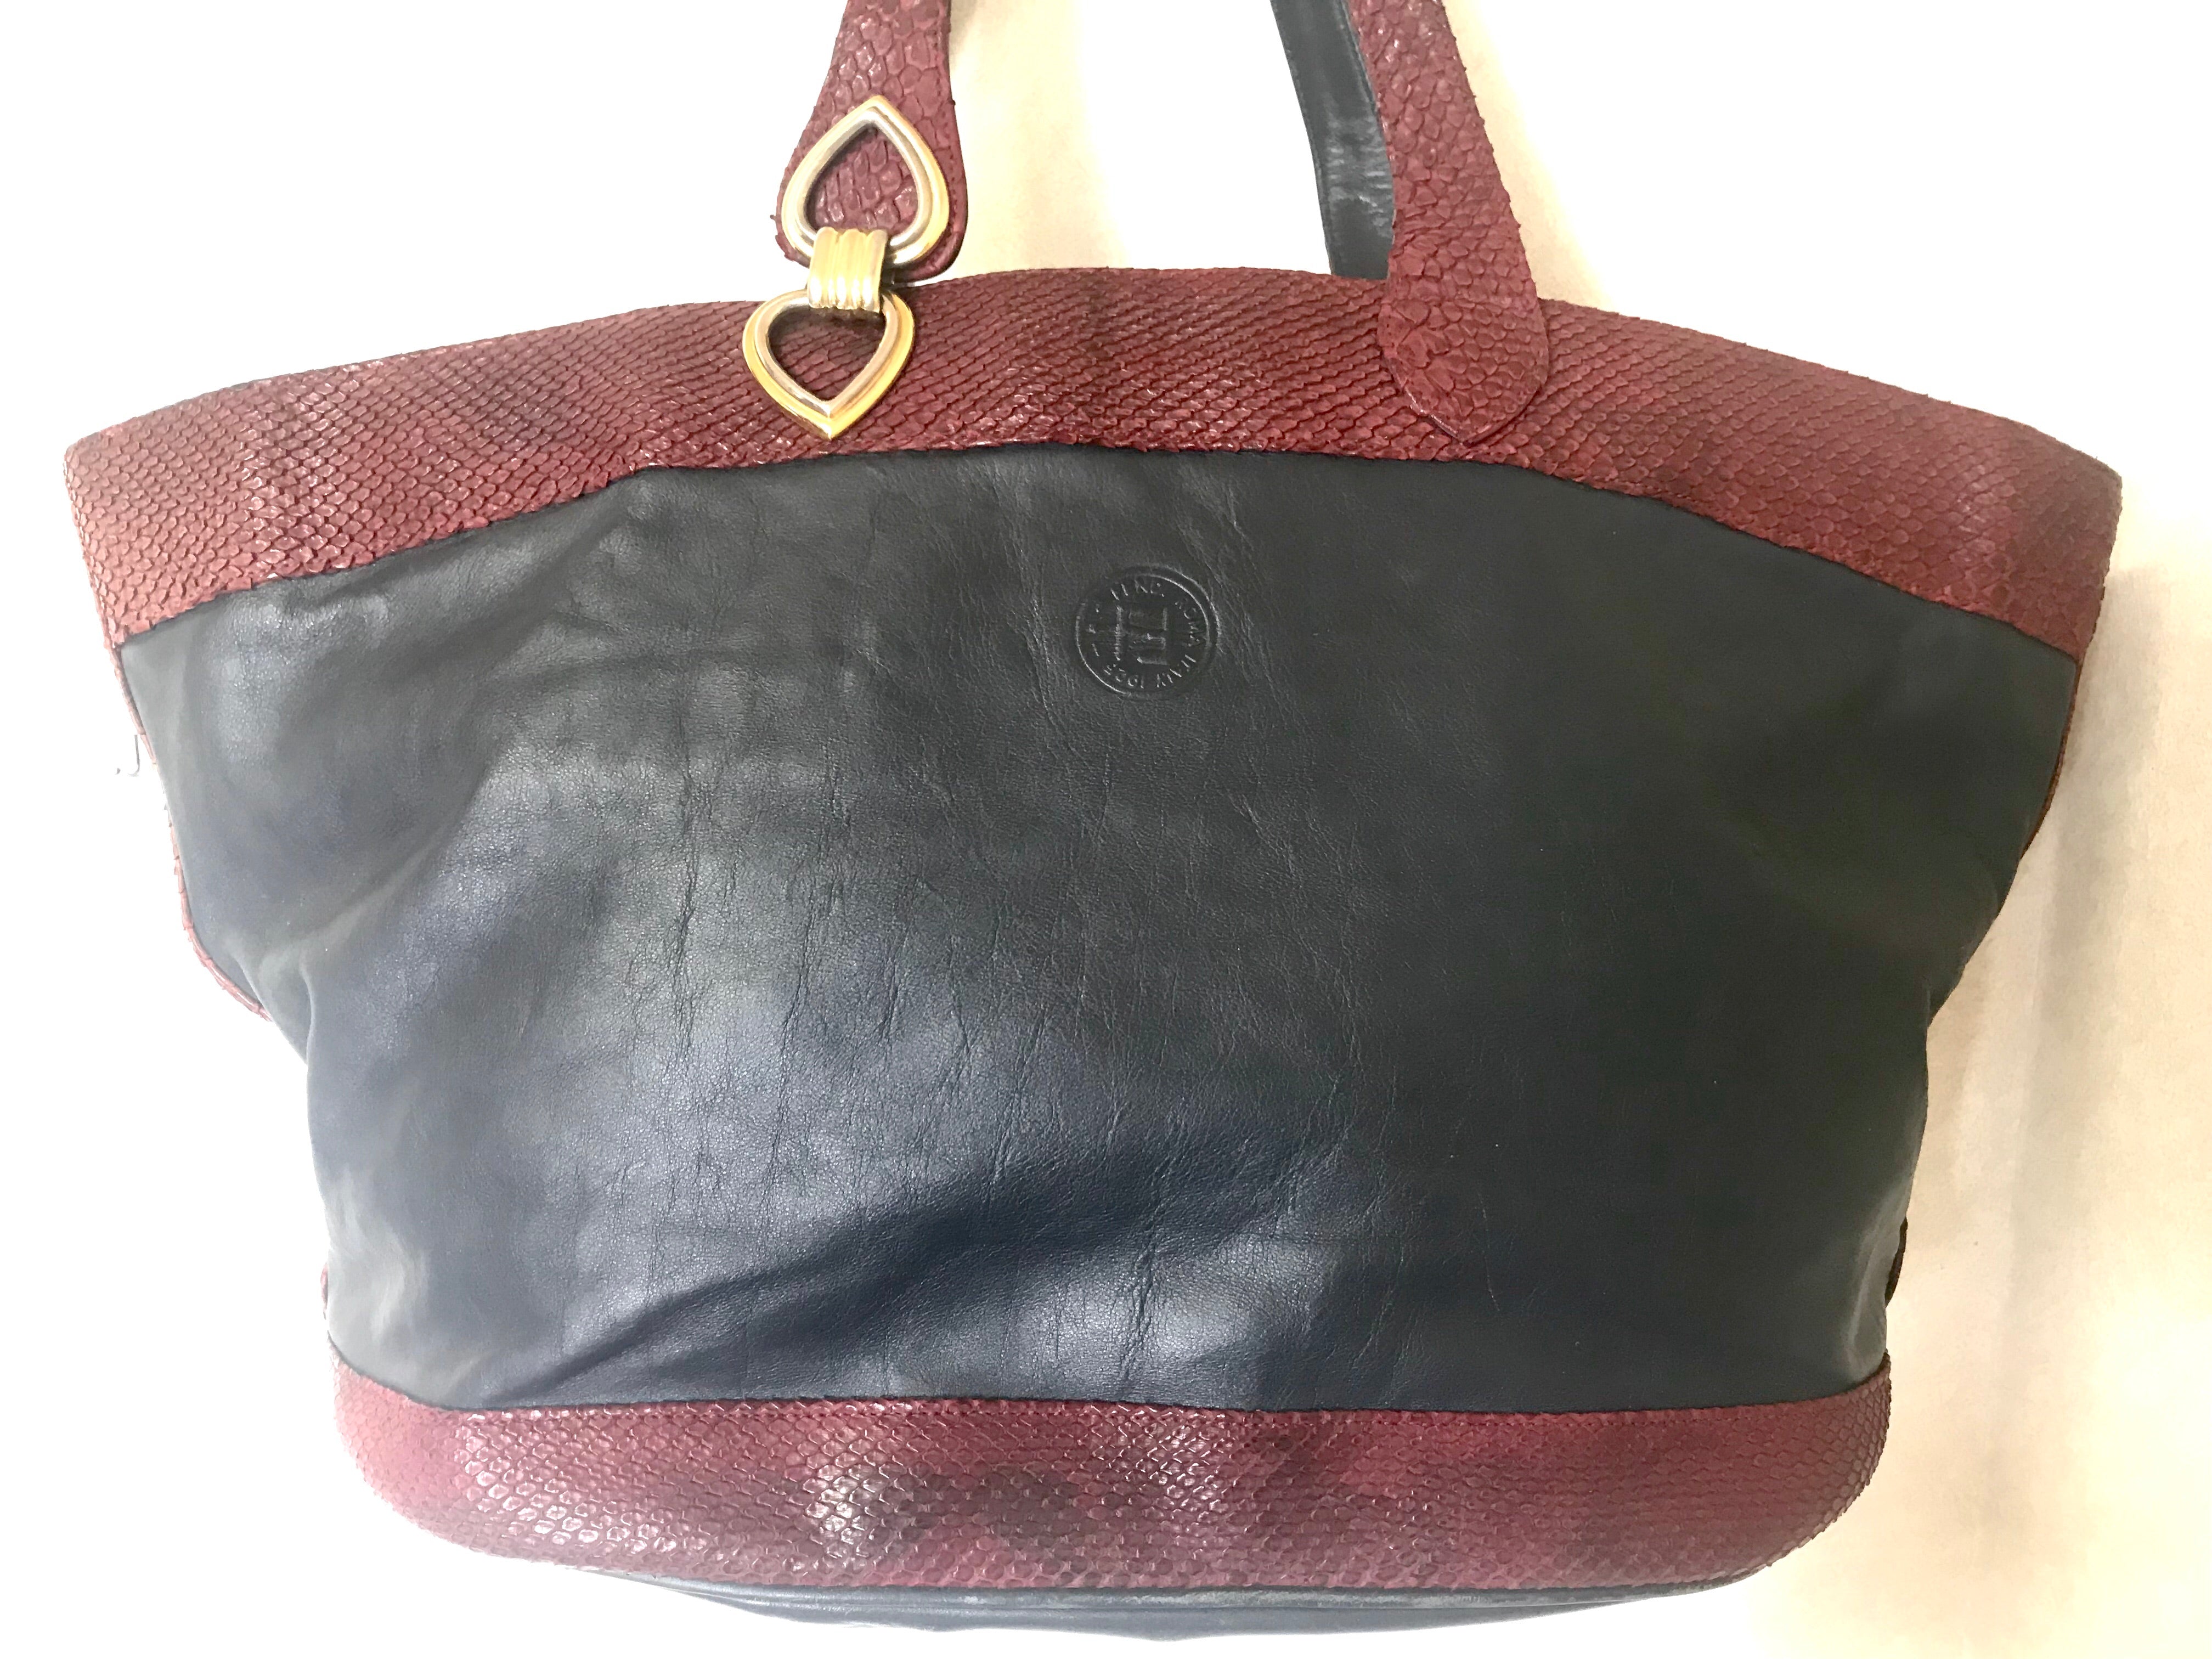 FENDI Kan I Embossed Leather Shoulder Bag - Excellent Condition & Authentic